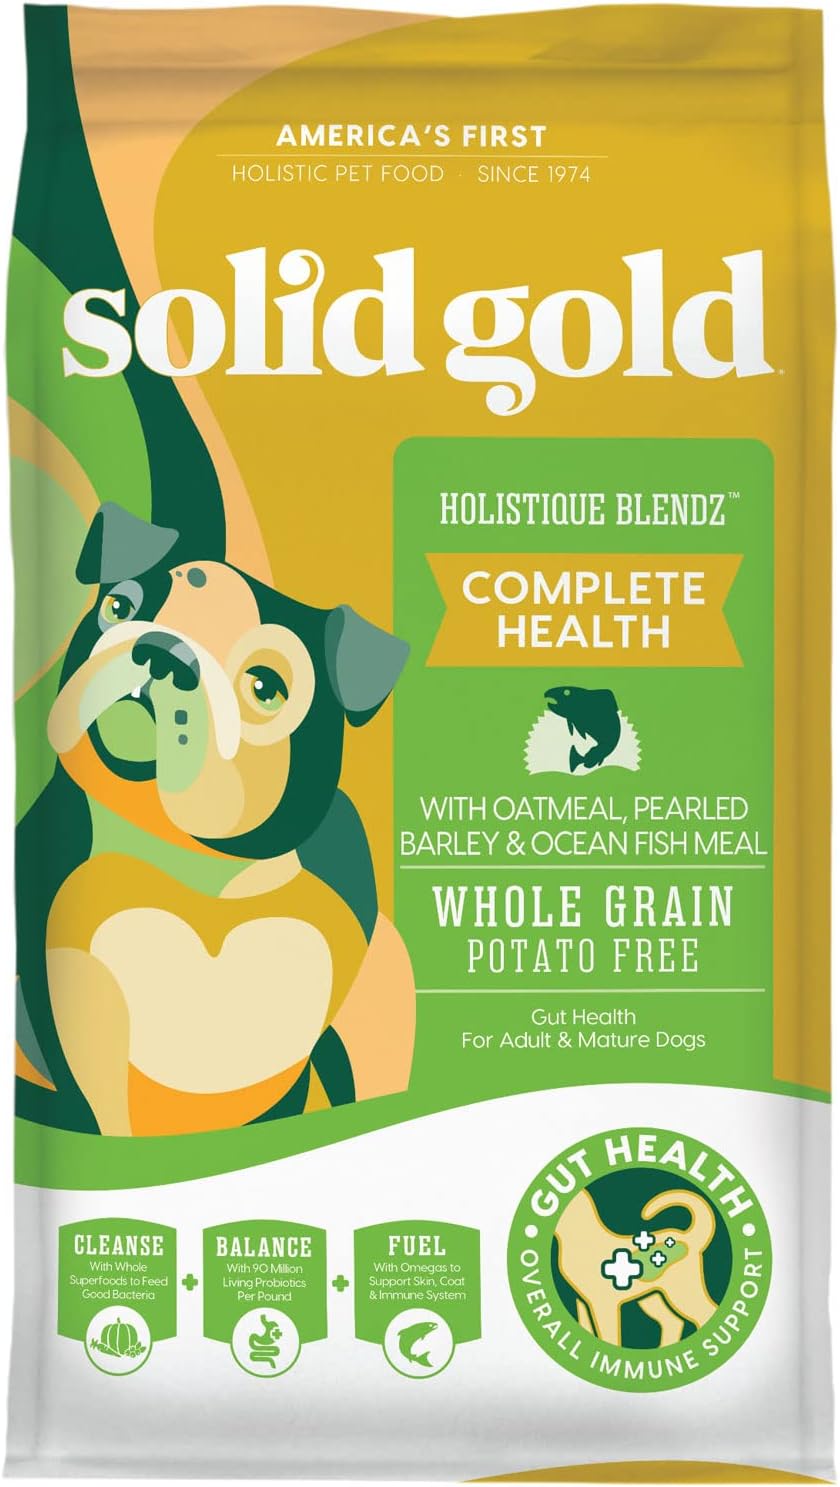 Solid Gold Dry Dog Food for Adult & Senior Dogs - Made with Oatmeal, Pearled Barley, and Fish Meal - Holistique Blendz Potato Free High Fiber Dog Food for Sensitive Stomach & Immune Support -24 LB